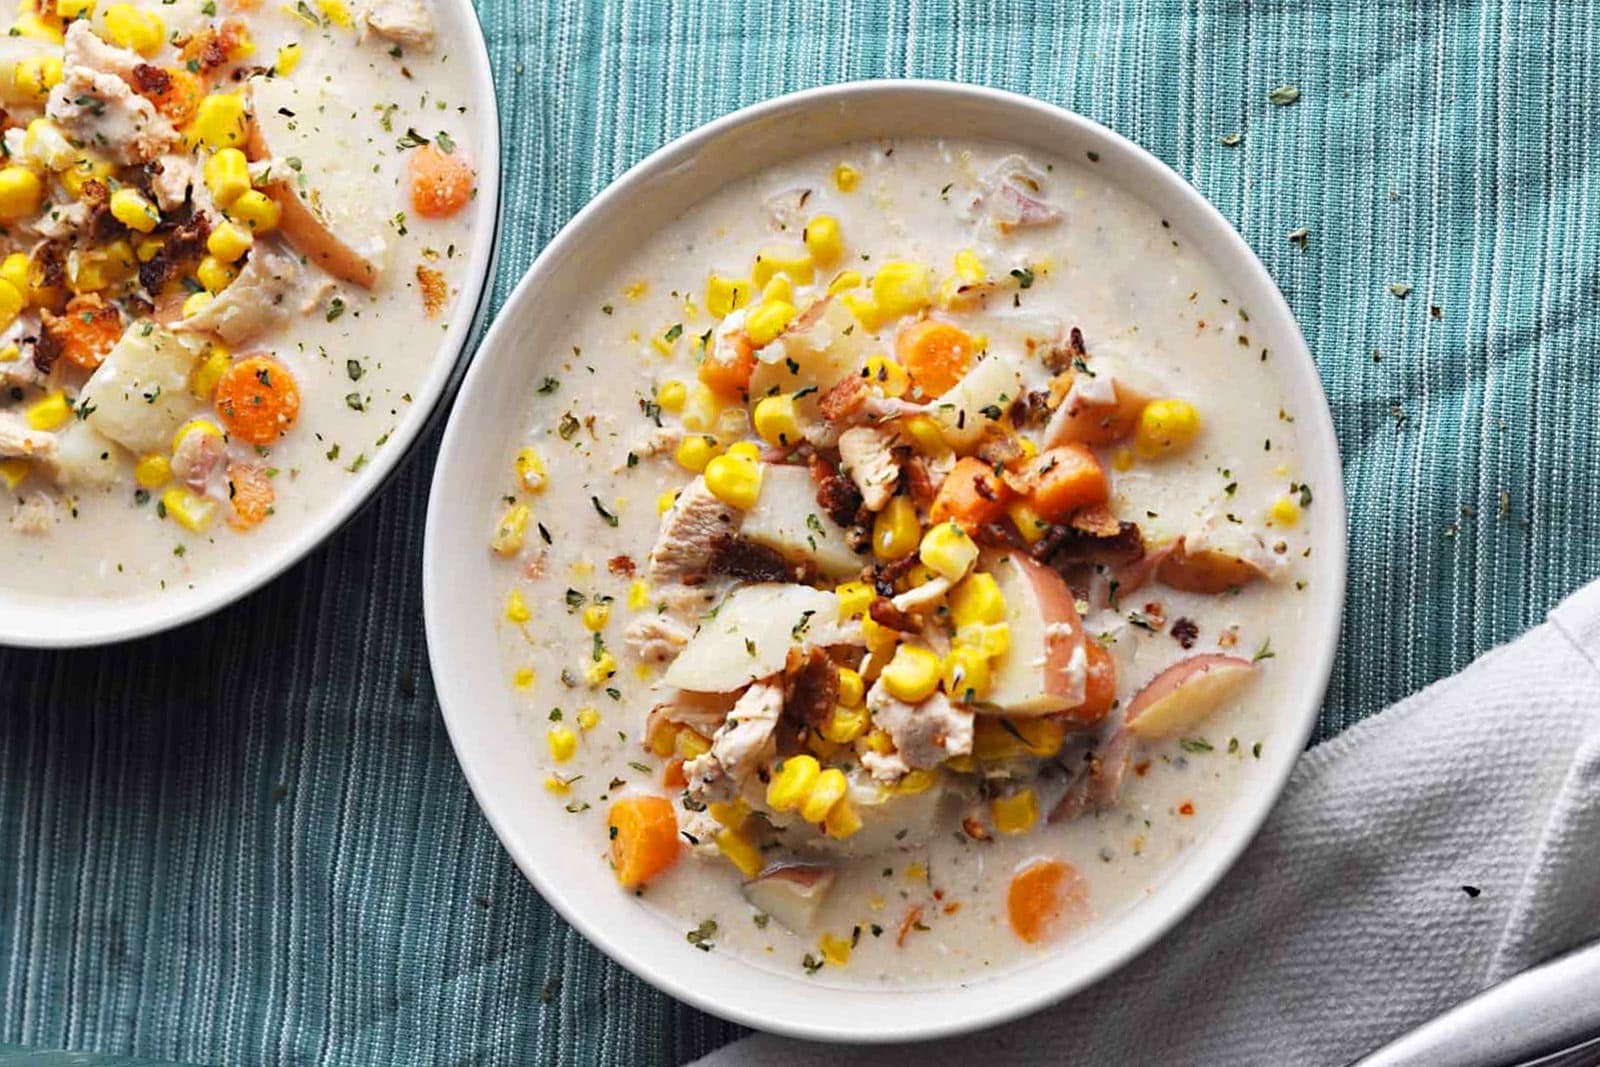 Bowl of slow cooked chicken and corn soup.